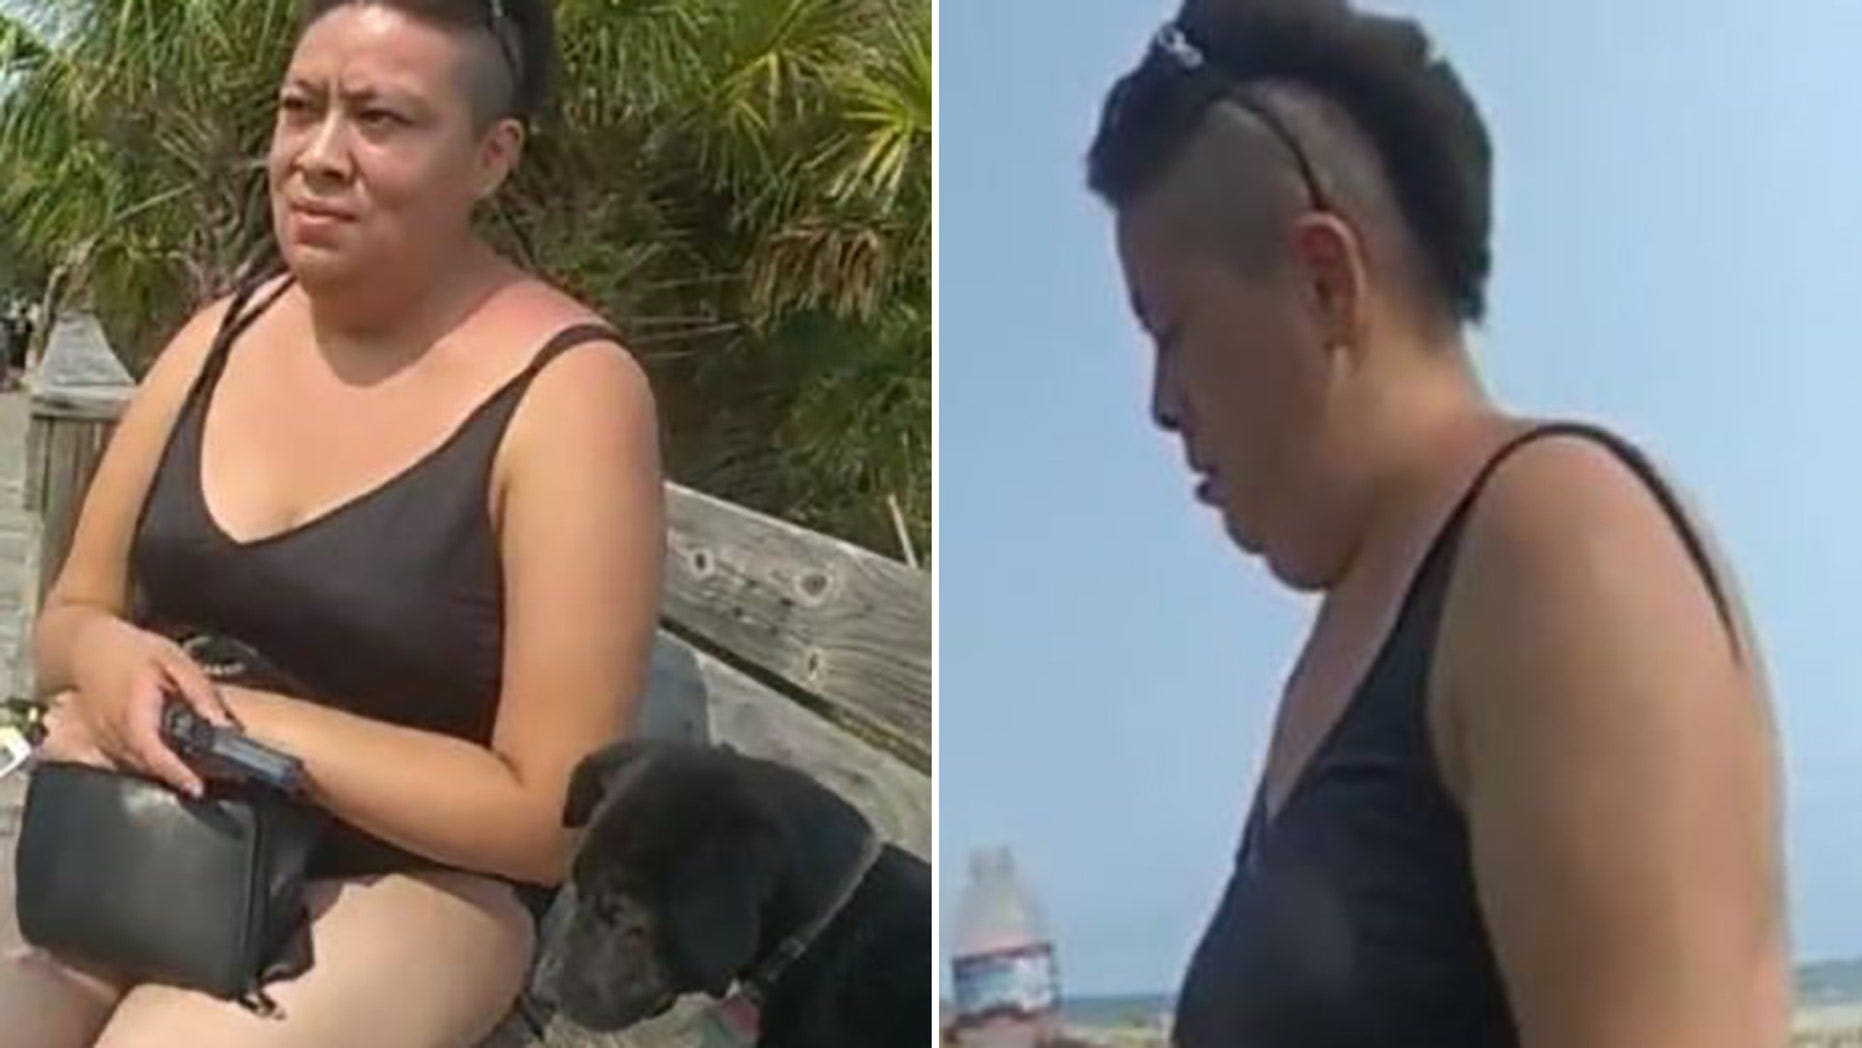 Georgia woman threw puppy into ocean because she couldn't afford a vet, police say